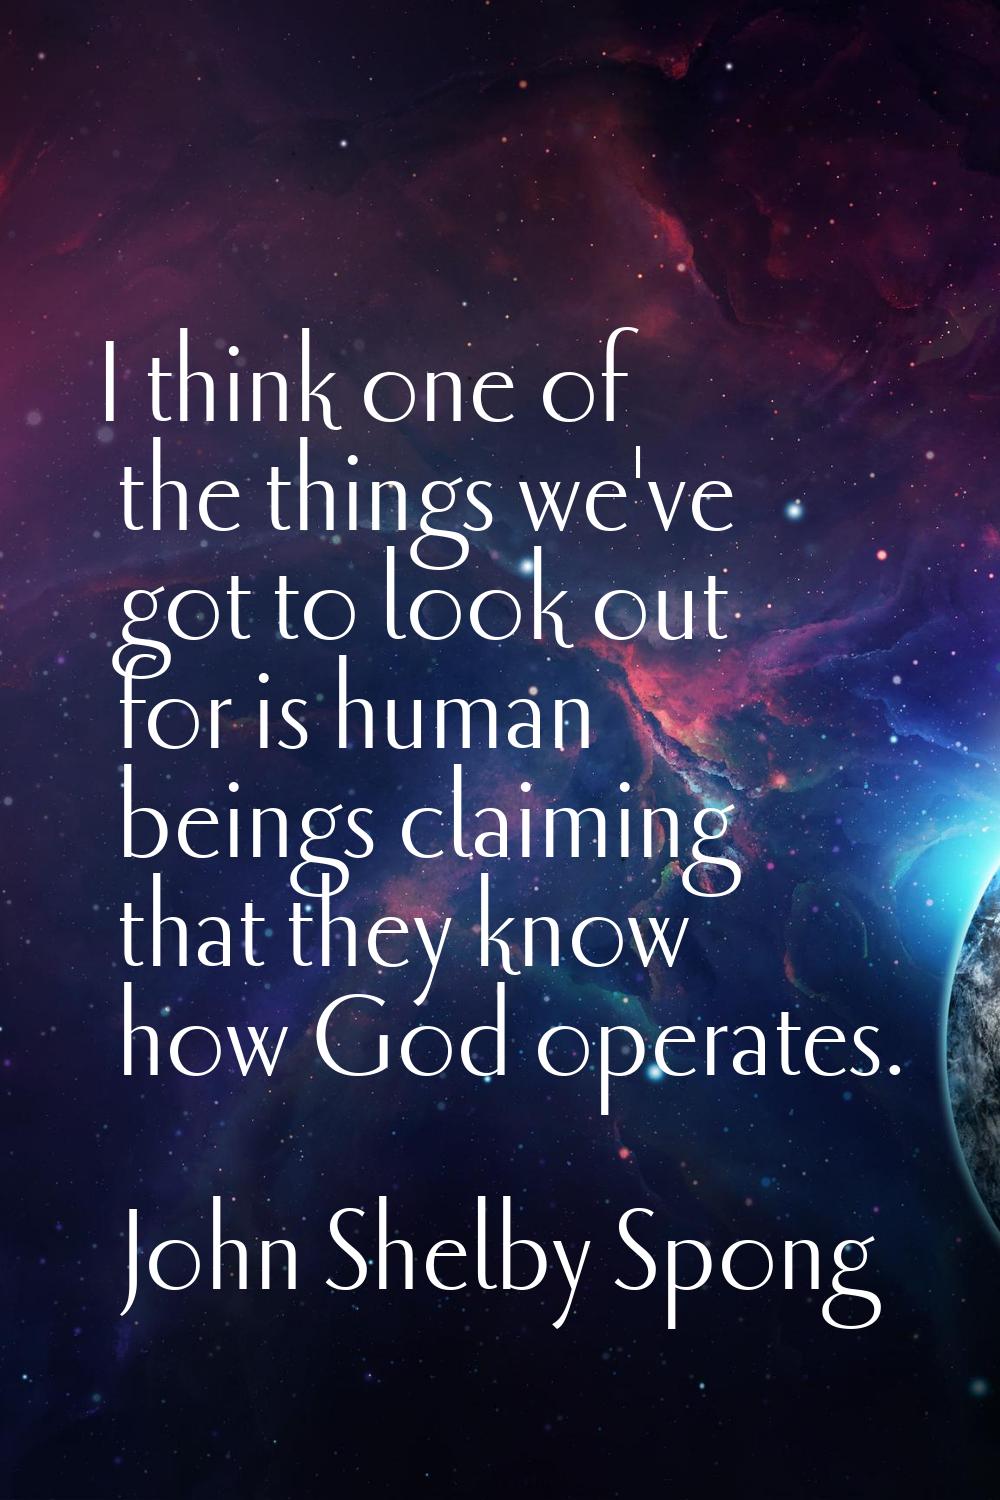 I think one of the things we've got to look out for is human beings claiming that they know how God